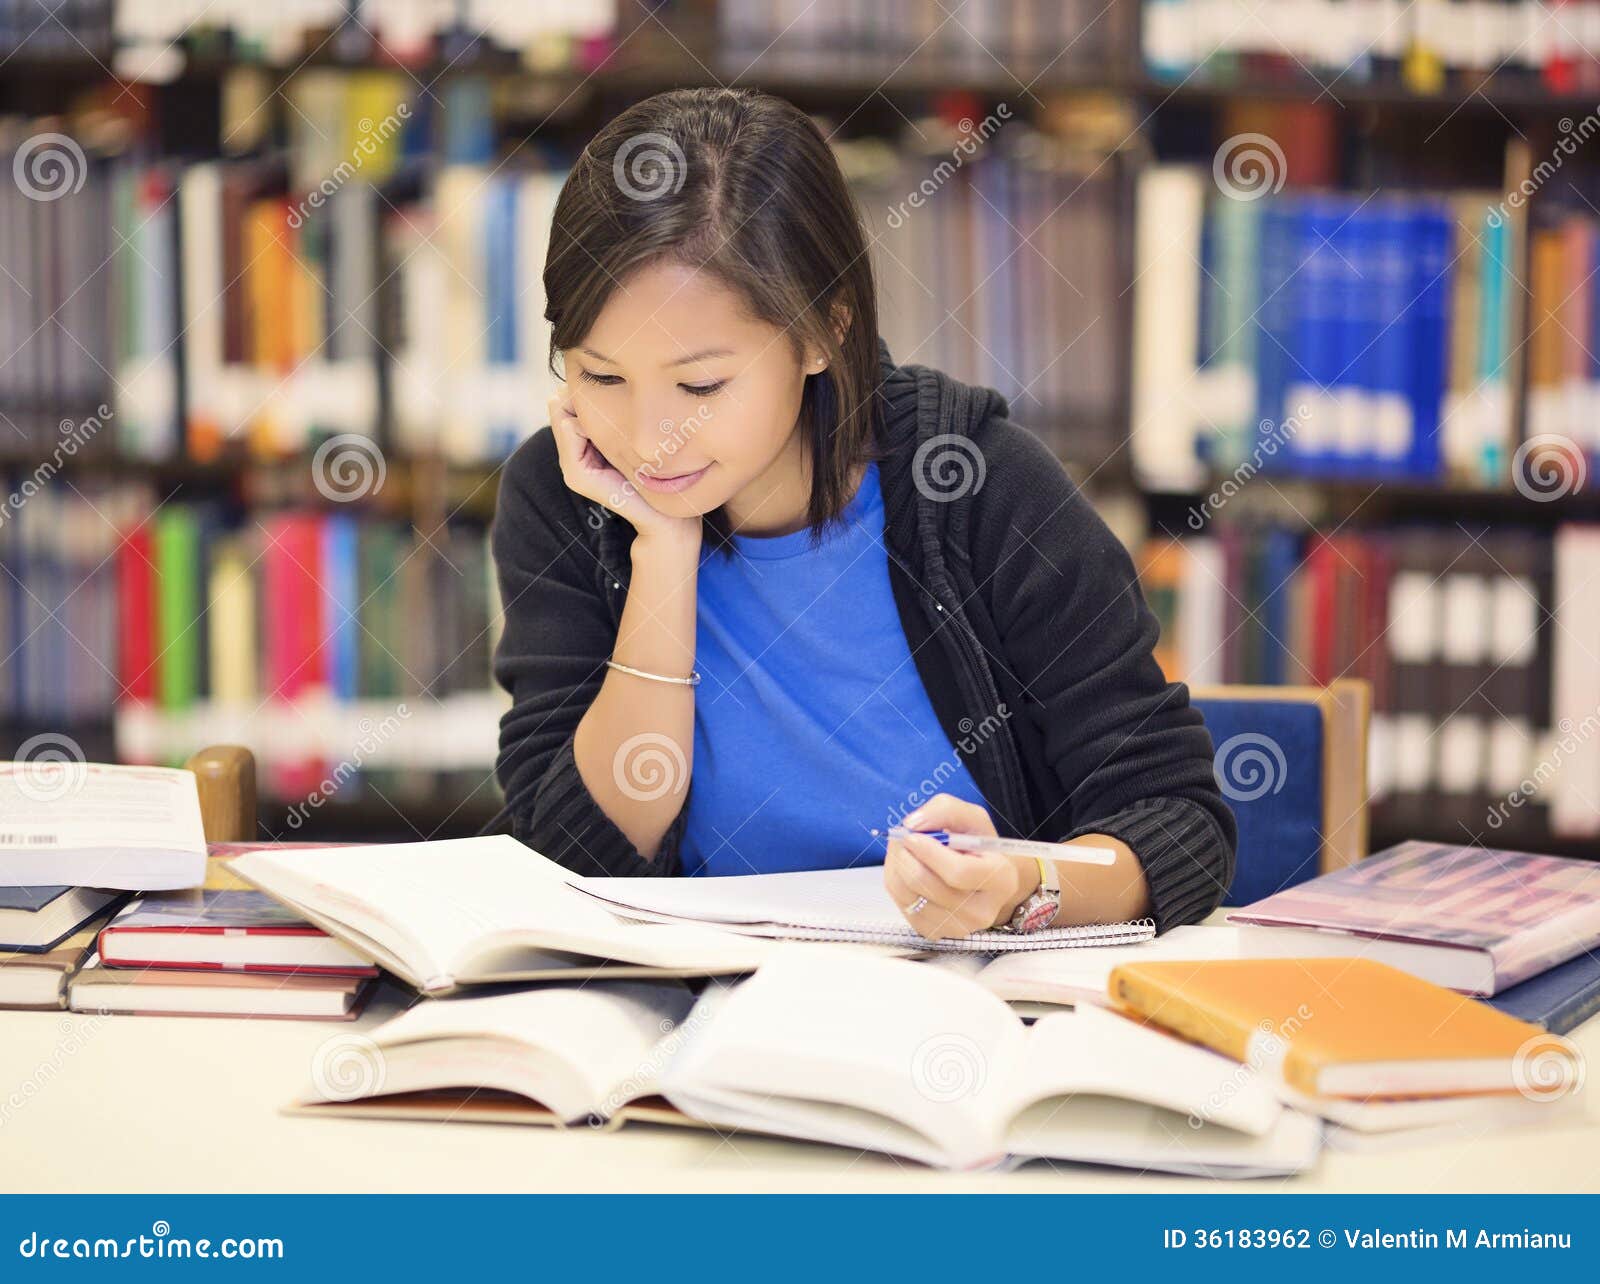 student sitting and reading book in library